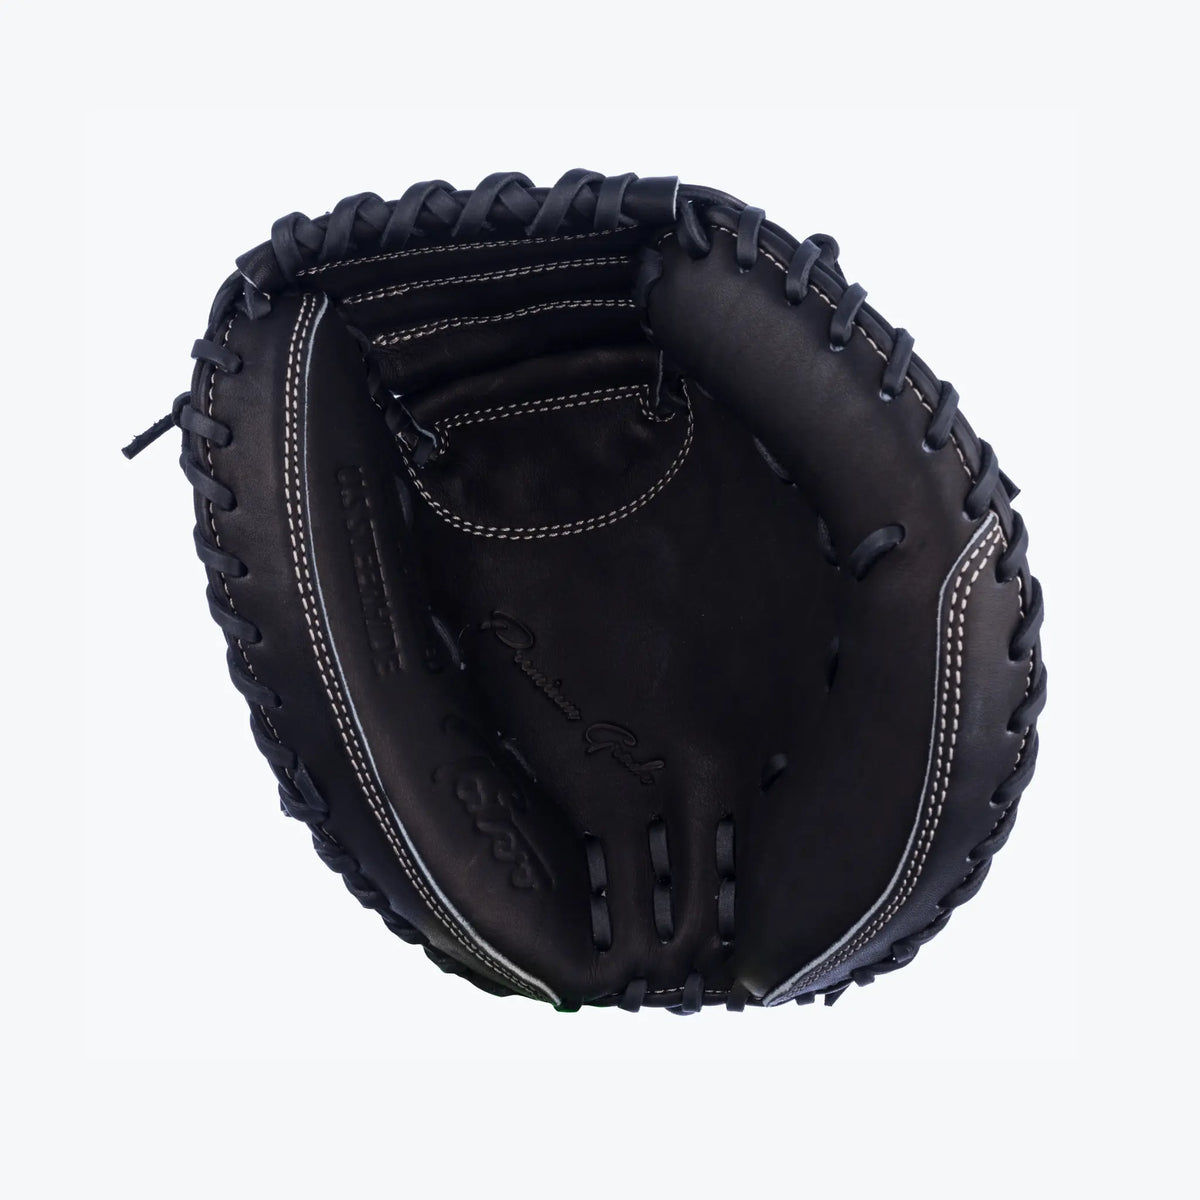 This image showcases the inside view of Tater Baseball&#39;s black catcher&#39;s mitt, a 28-inch mini trainer. The mitt&#39;s compact design is emphasized by the detailed white stitching and embossed logo, engineered for catchers to practice and master their craft with a focus on control and quick transfer.